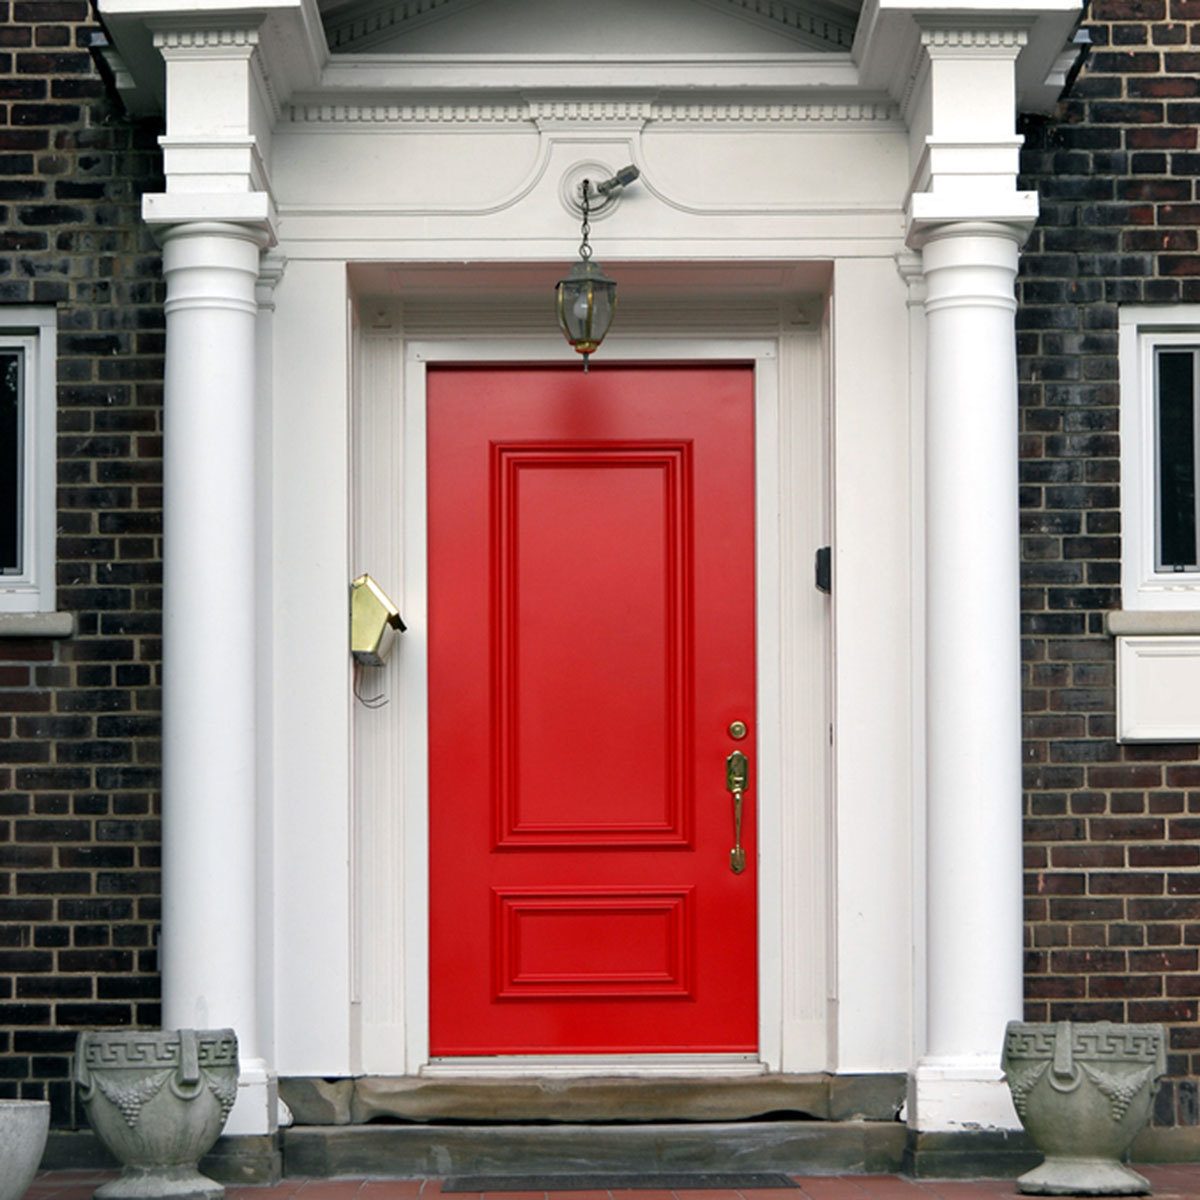 15 Stunning Front Door Colors That Wow | Family Handyman